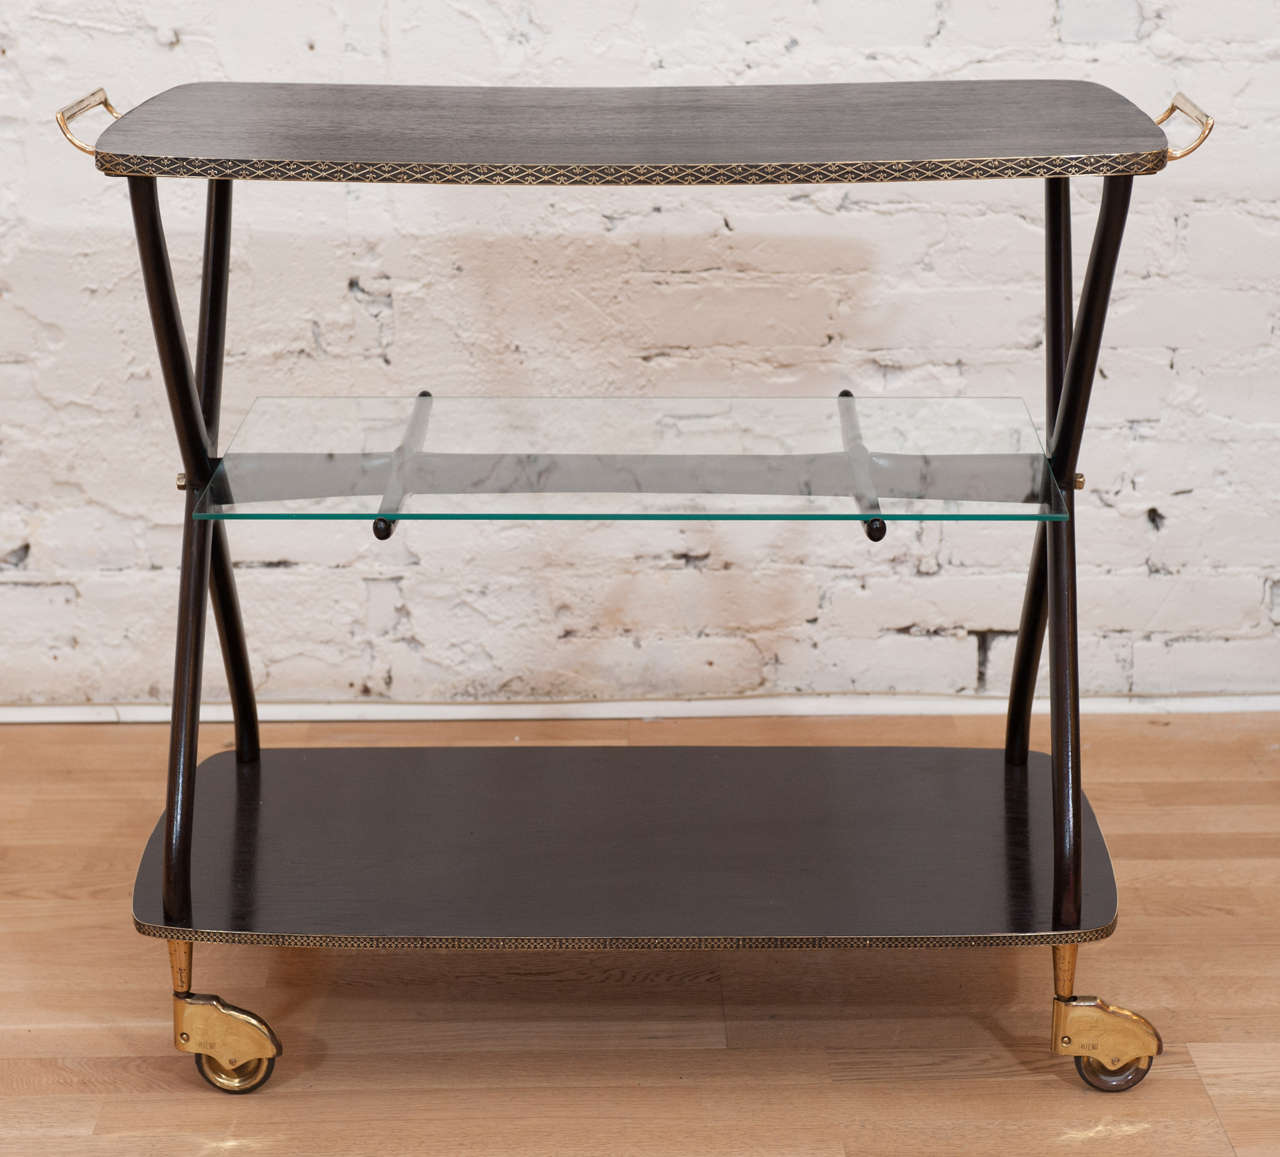 This swish and swank wood serving cart with brass handles has been restored to its early glory....refinished, polished with
new lower level glass shelf this Italian bar cart is ready to impress.